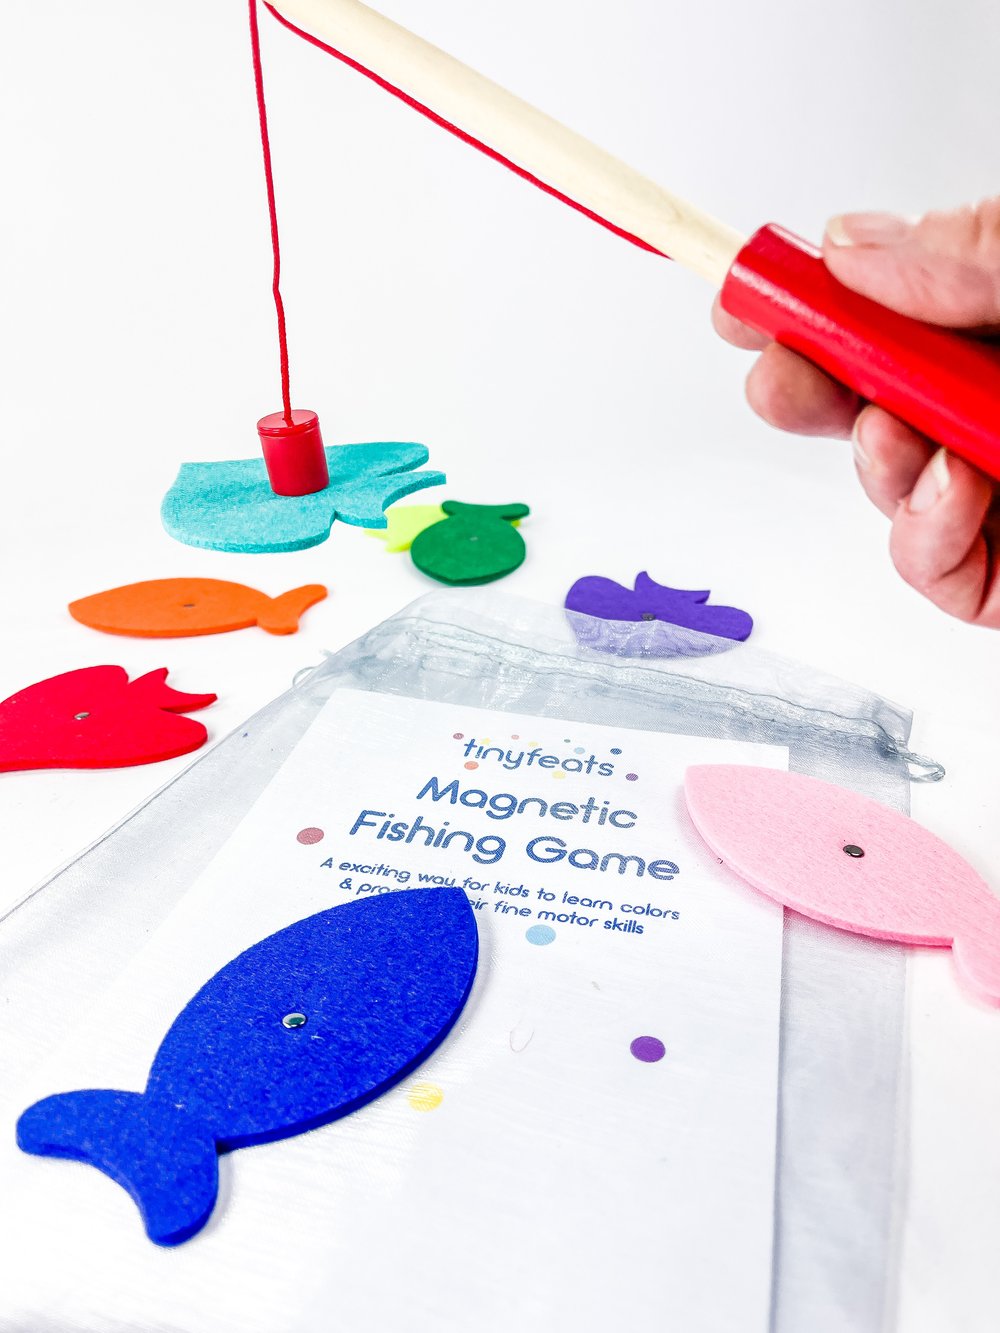 Magnetic Fishing Game — openhandlearning